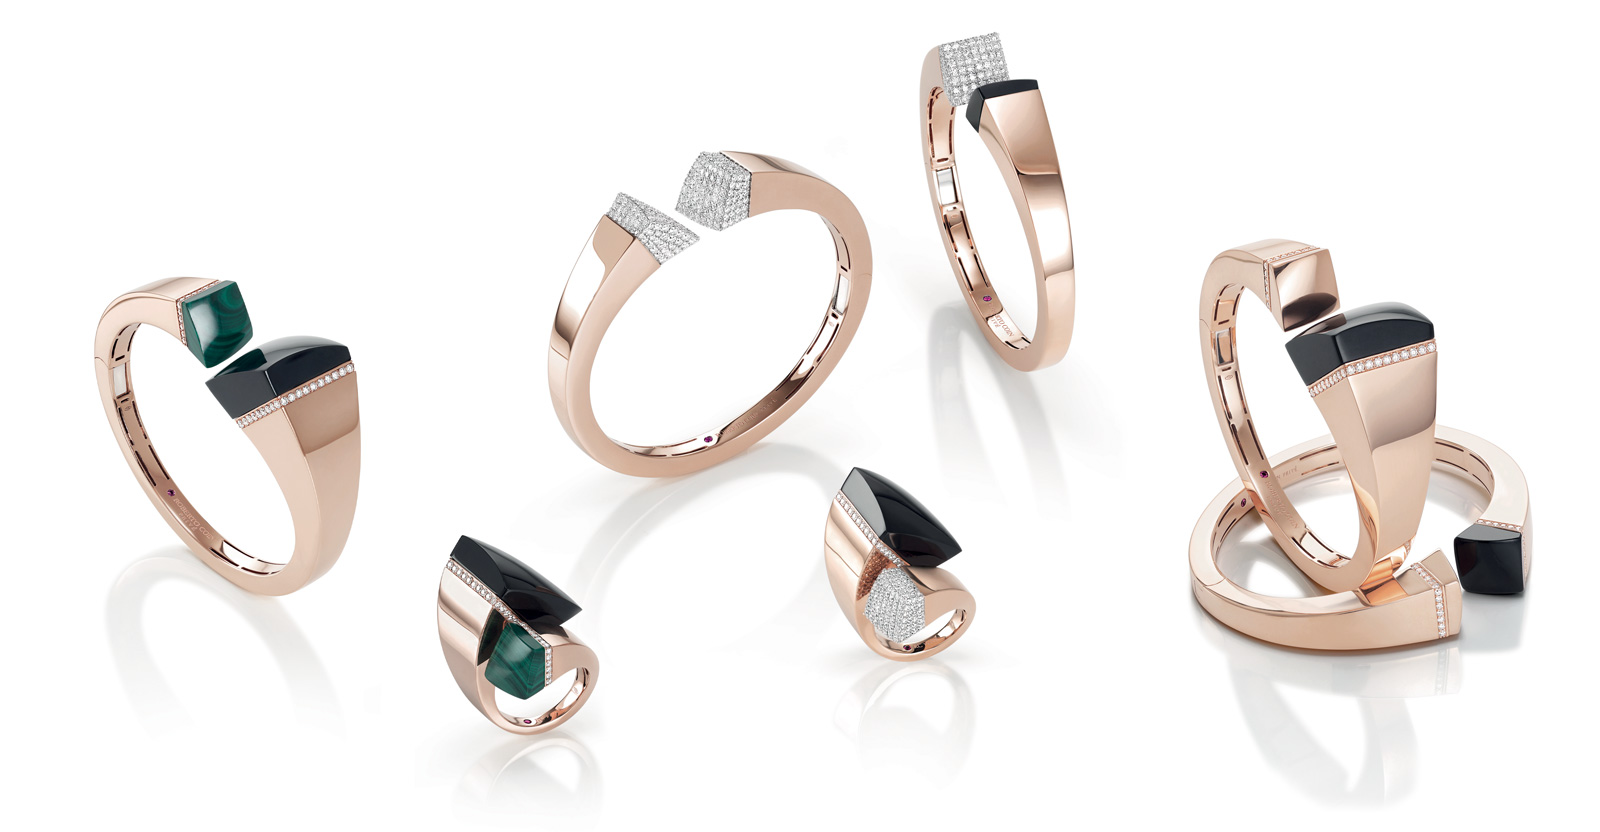 Roberto Coin Sauvage Privé collection in rose gold with malachite, black jade and diamonds